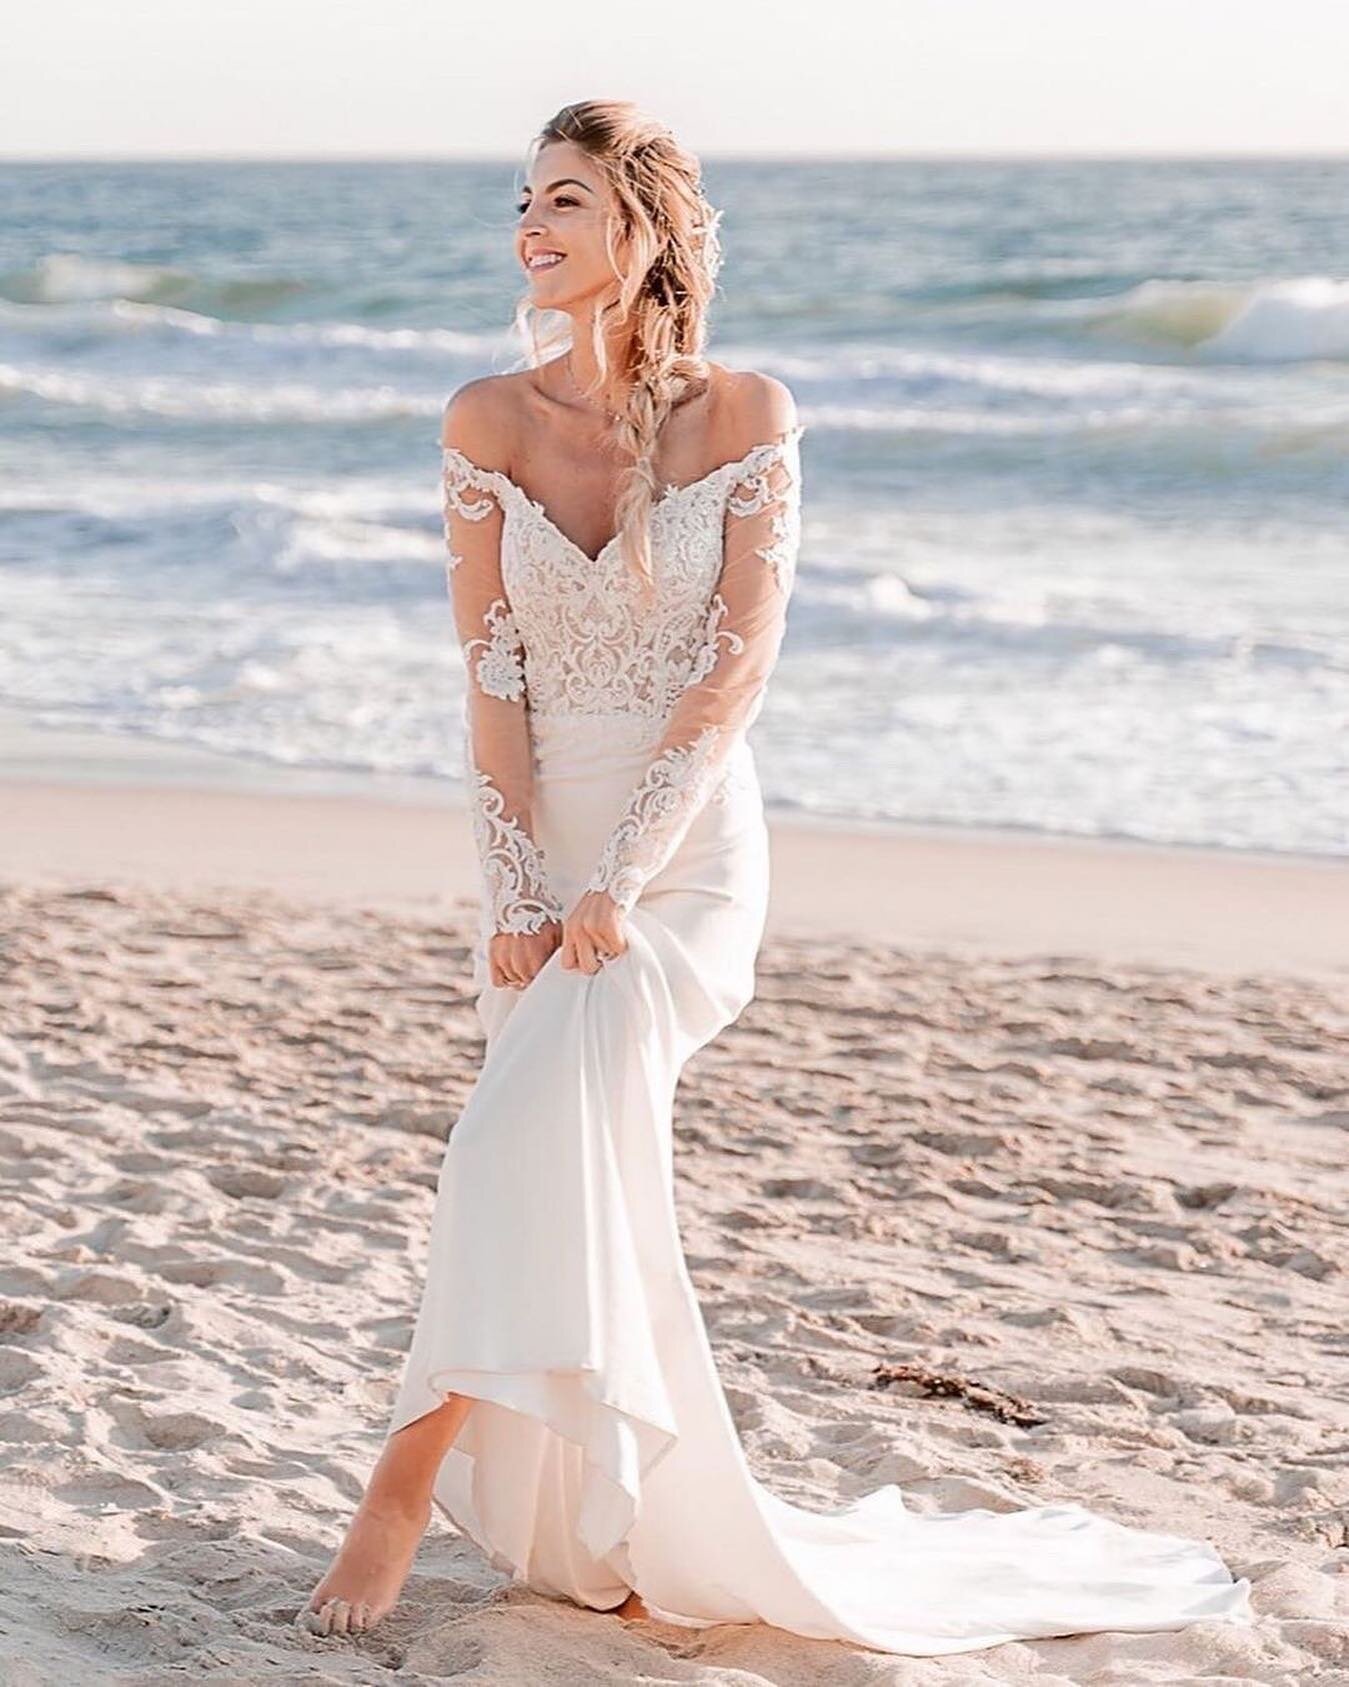 Photo by @fleurishla

&quot;Sound advice and gorgeous photo of our #Fleurishbride by @gildedphoto
.
&quot;If you get married at the beach, don't be afraid to actually go to the beach on your wedding day. Kick off the heels, get comfortable, wiggle th